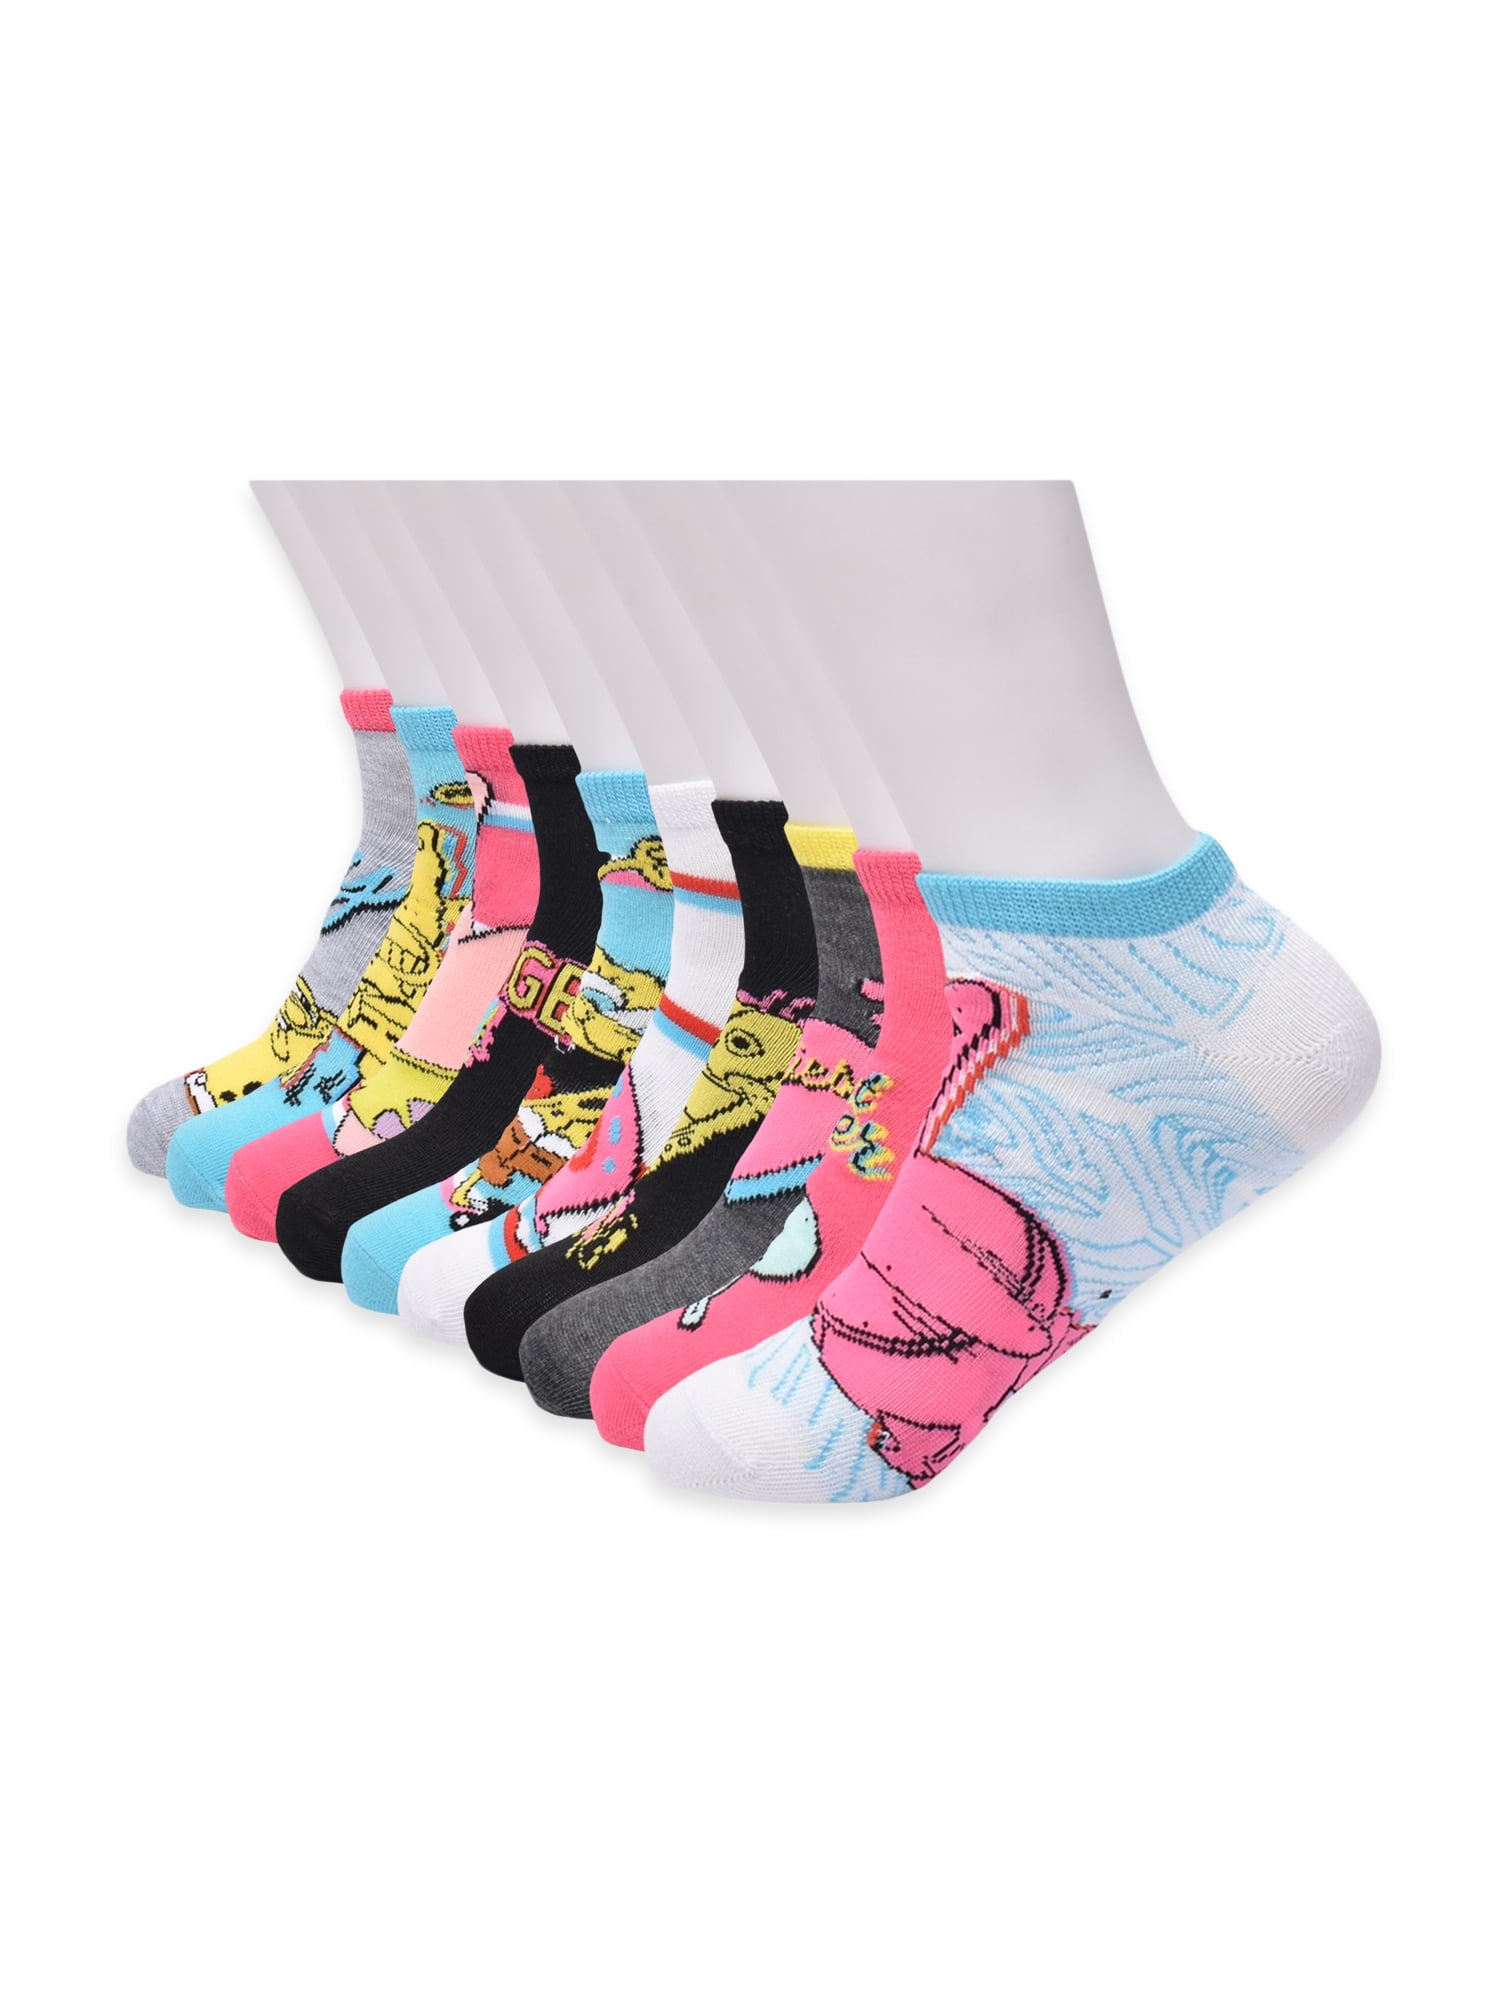  Cool Socks Women's Knit Crew Socks, Meangirls (White/Pink, One  Size) : Clothing, Shoes & Jewelry